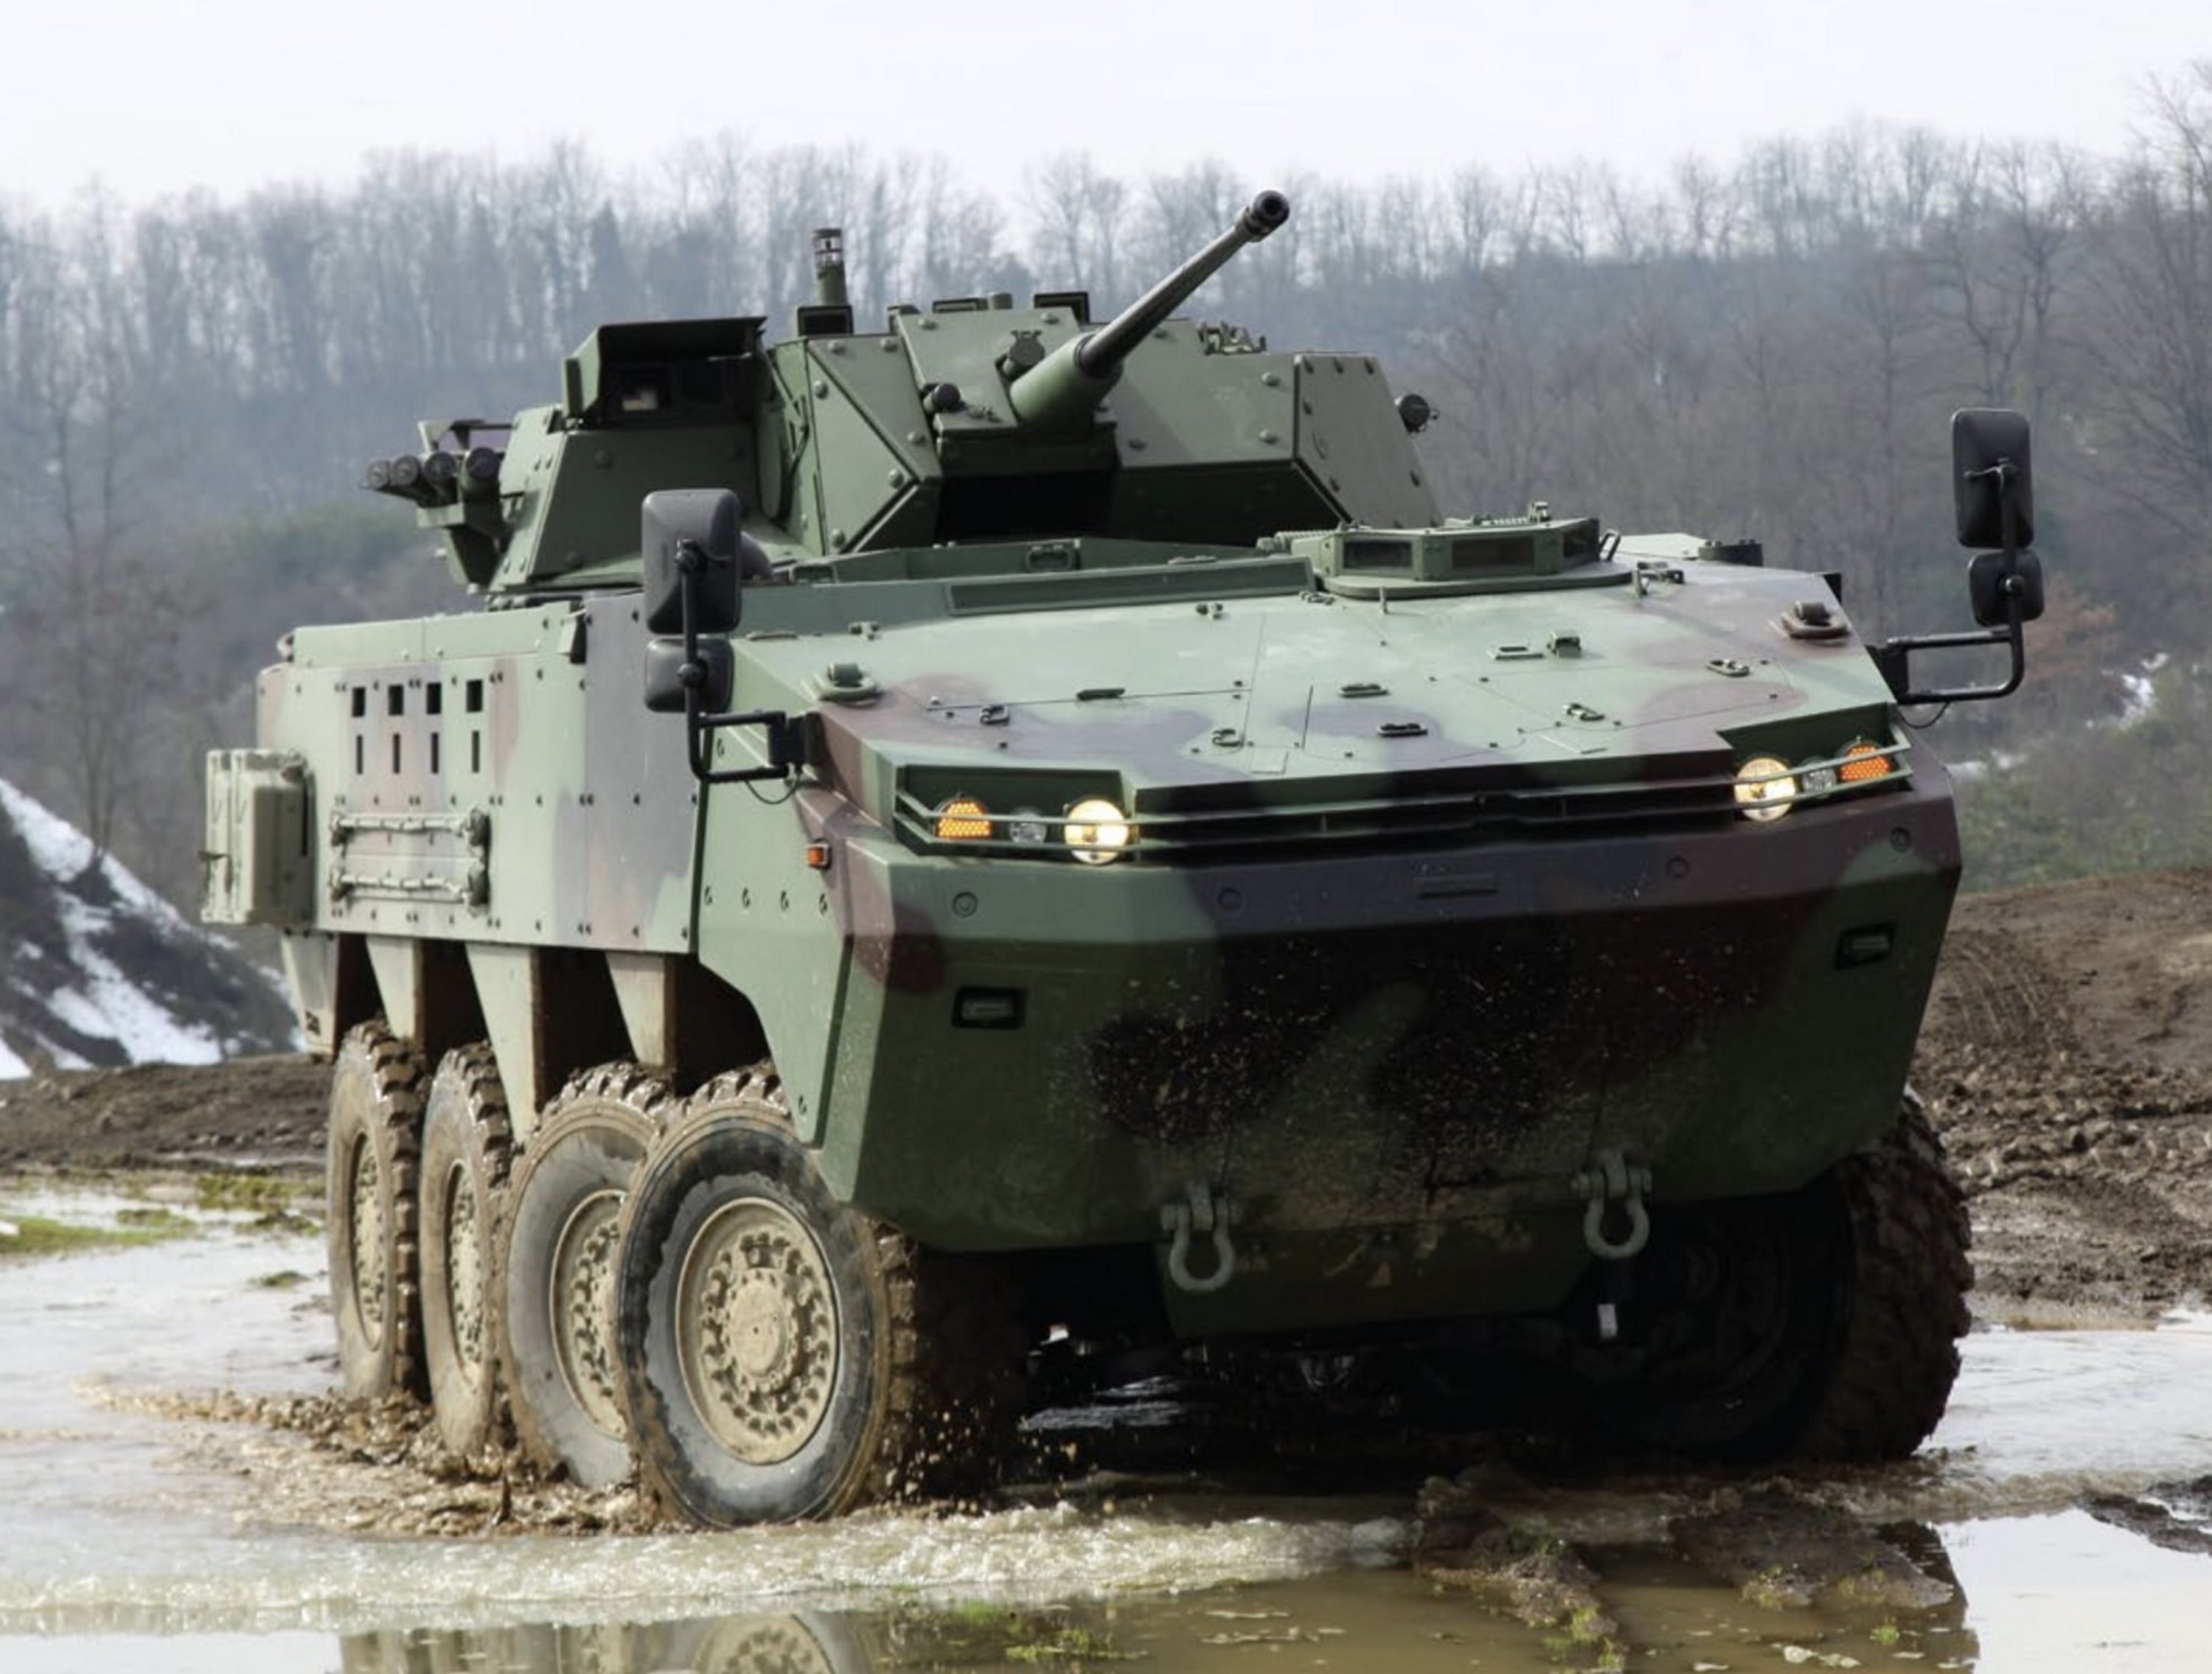 Armored vehicle ARMA 8x8 enters Turkish Armed Forces' inventory